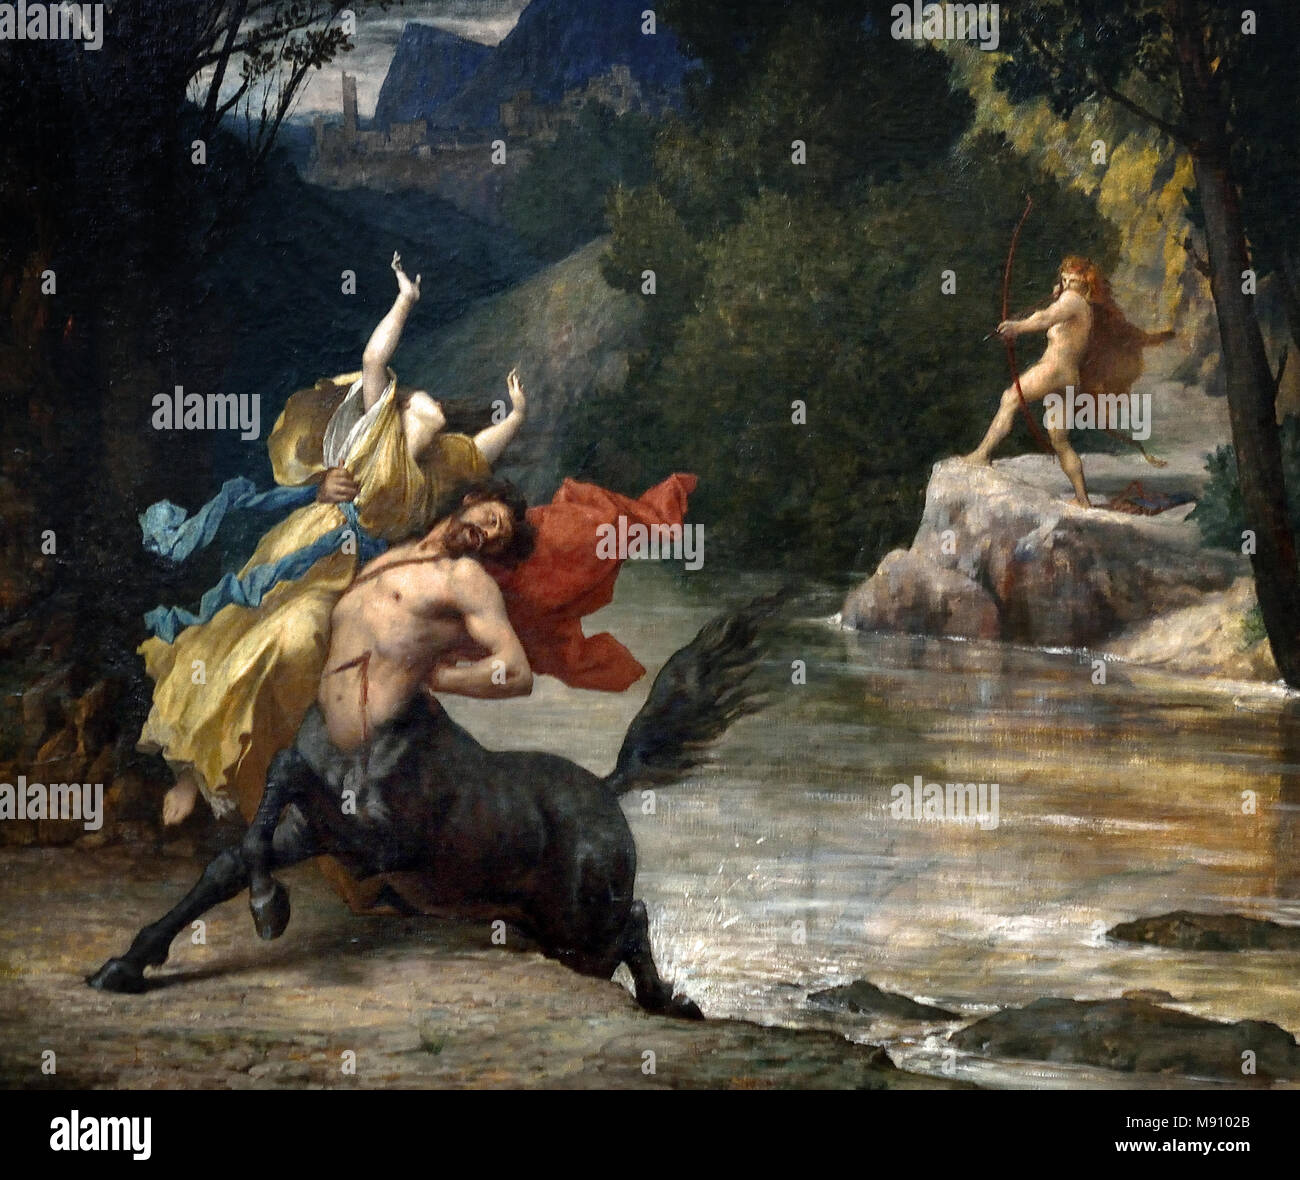 Mort de Nessus - Death of Nessus 1876 Jules Elie DELAUNAY, 1828 - 1891, France, French, ( In Greek mythology, Nessus  was a famous centaur who was killed by Heracles, and whose tainted blood in turn killed Heracles. ) Stock Photo